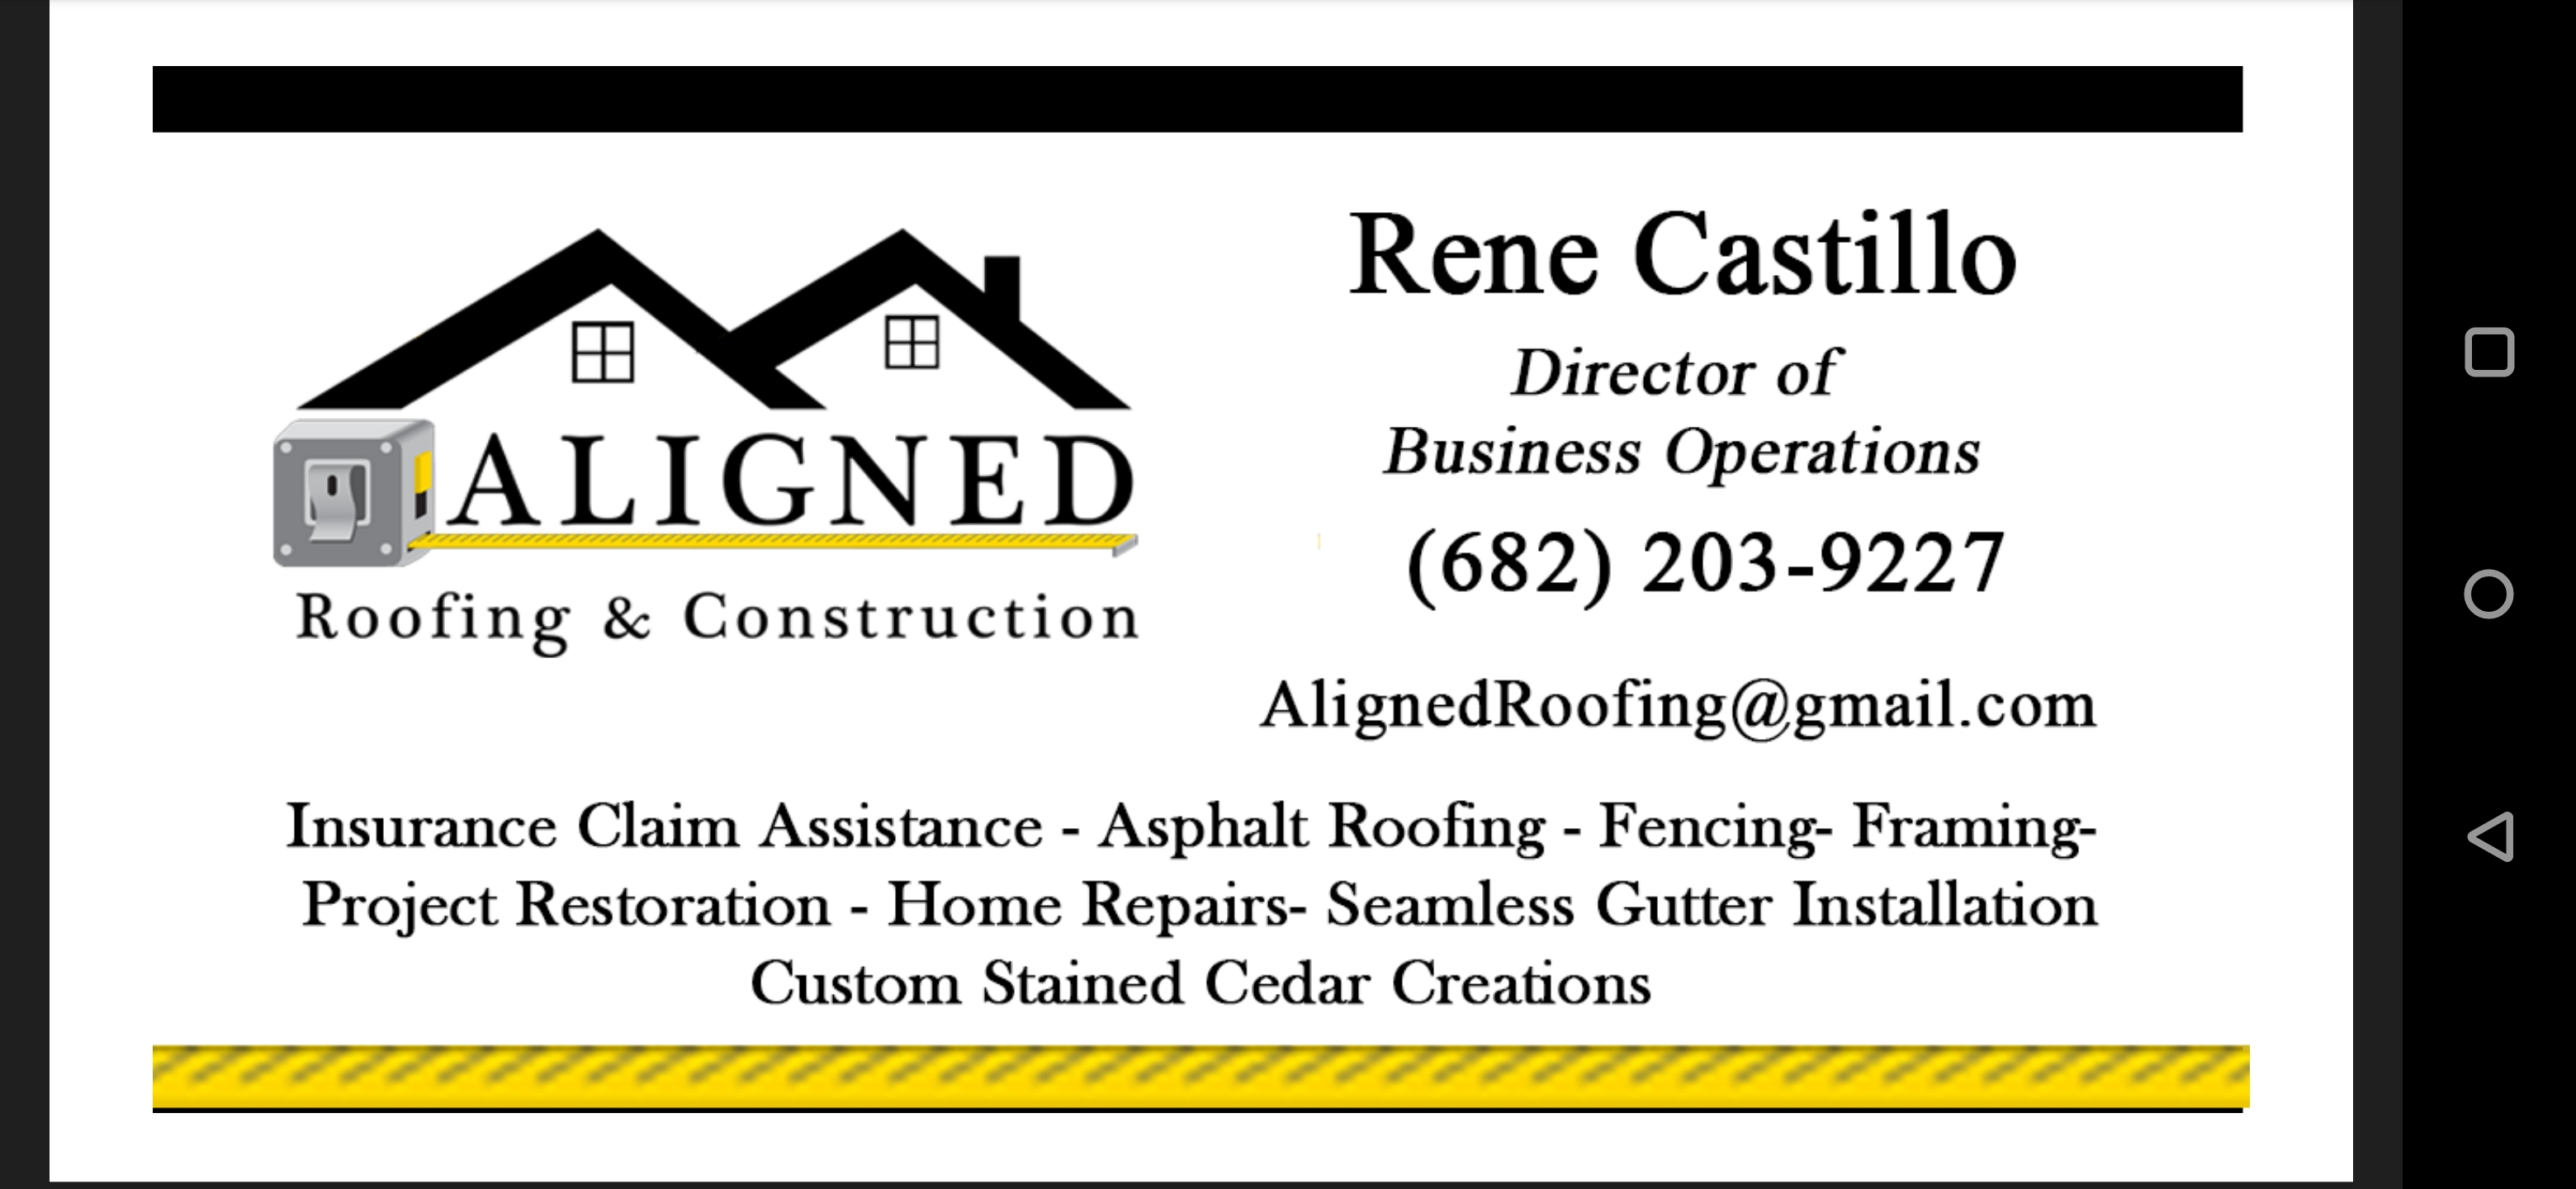 Aligned Roofing & Construction Logo